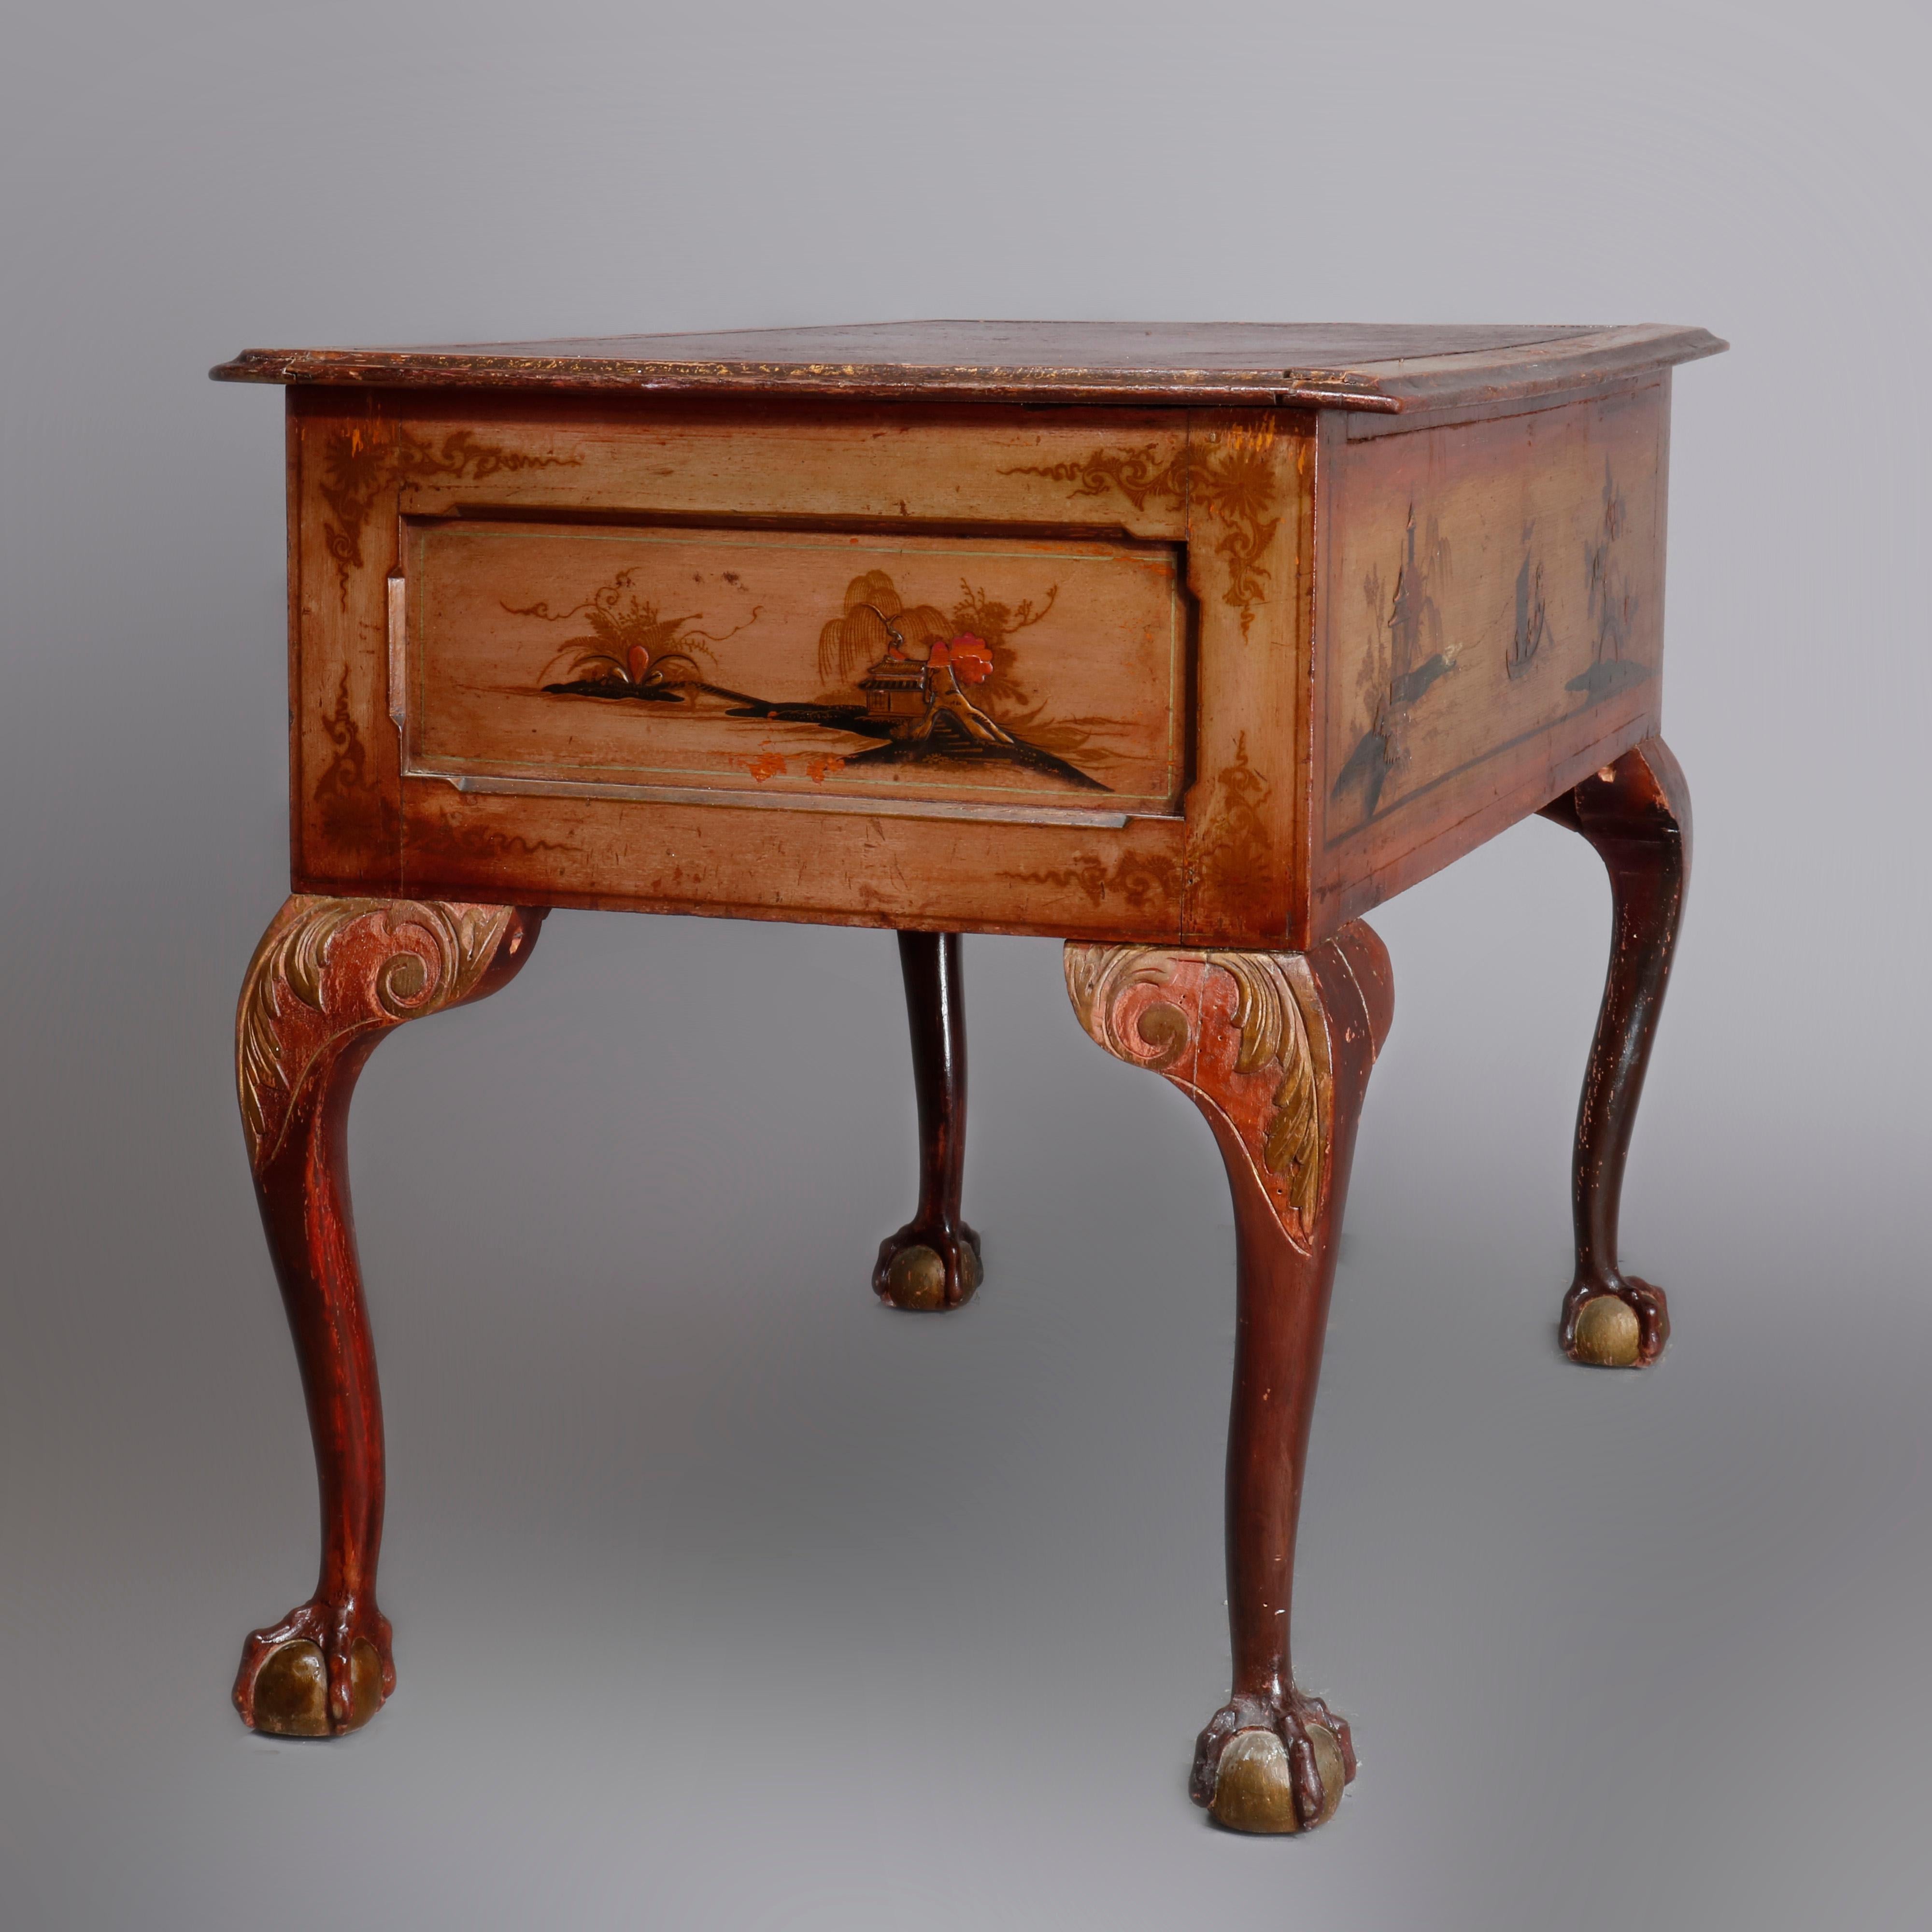 An early antique English Chippendale writing desk offers hand painted and gilt chinoiserie decorated top with leather writing surface surmounting decorated case having 5 drawers and raised on carved cabriole legs having acanthus foliate knees and